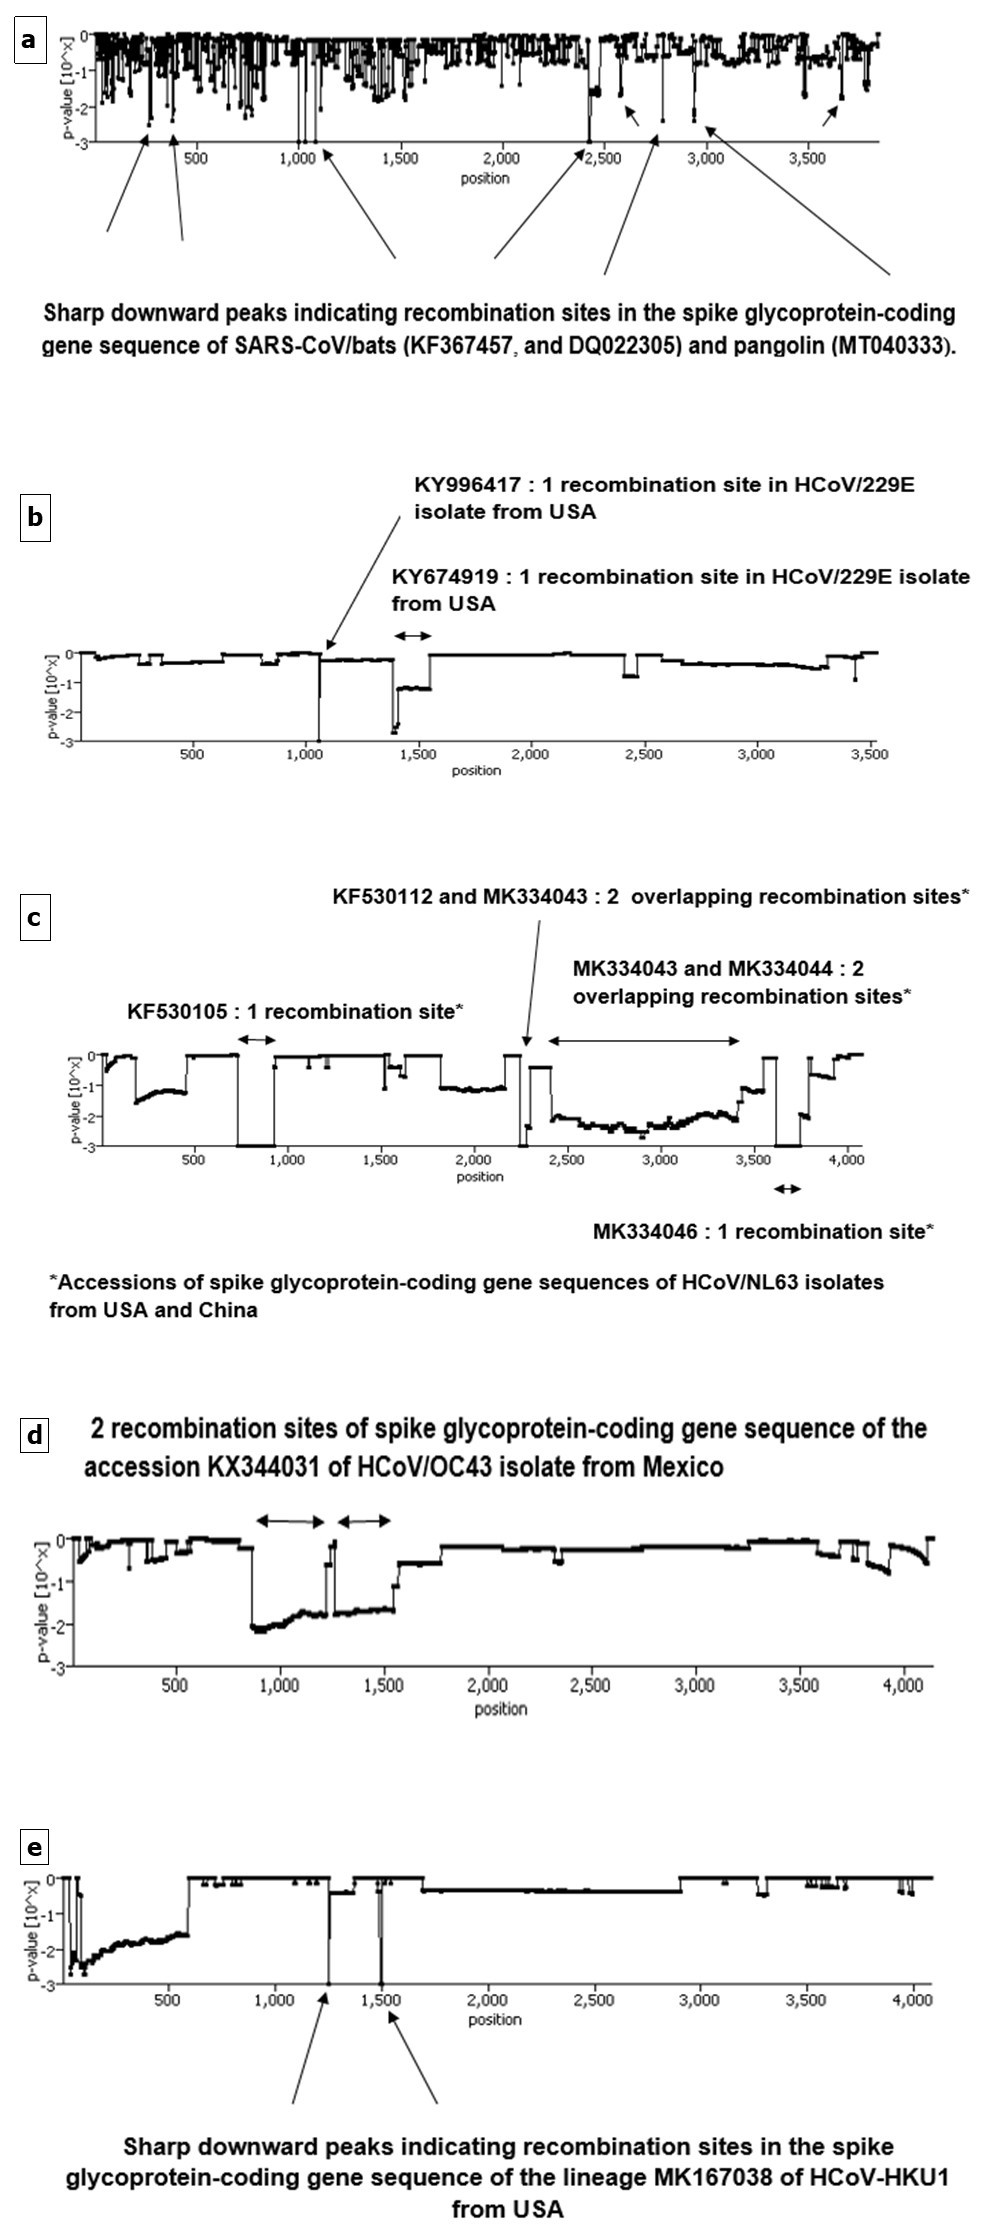  Graphs displaying potential recombination breakpoints illustrated by downward peaks in aligned sequences of spike glycoprotein-coding gene of coronaviruses lineages belonging to a) cluster I (subgroup III) (SARS-CoV/bats and pangolin), b) cluster III (subgroup I) (HCoV/229E), c) cluster III (subgroup II) (HCoV/NL63), d) cluster IV (subgroup I) (HCoV/OC43) and e) cluster IV (subgroup II) (HCoV/HKU1) determined by RECCO algorithm.